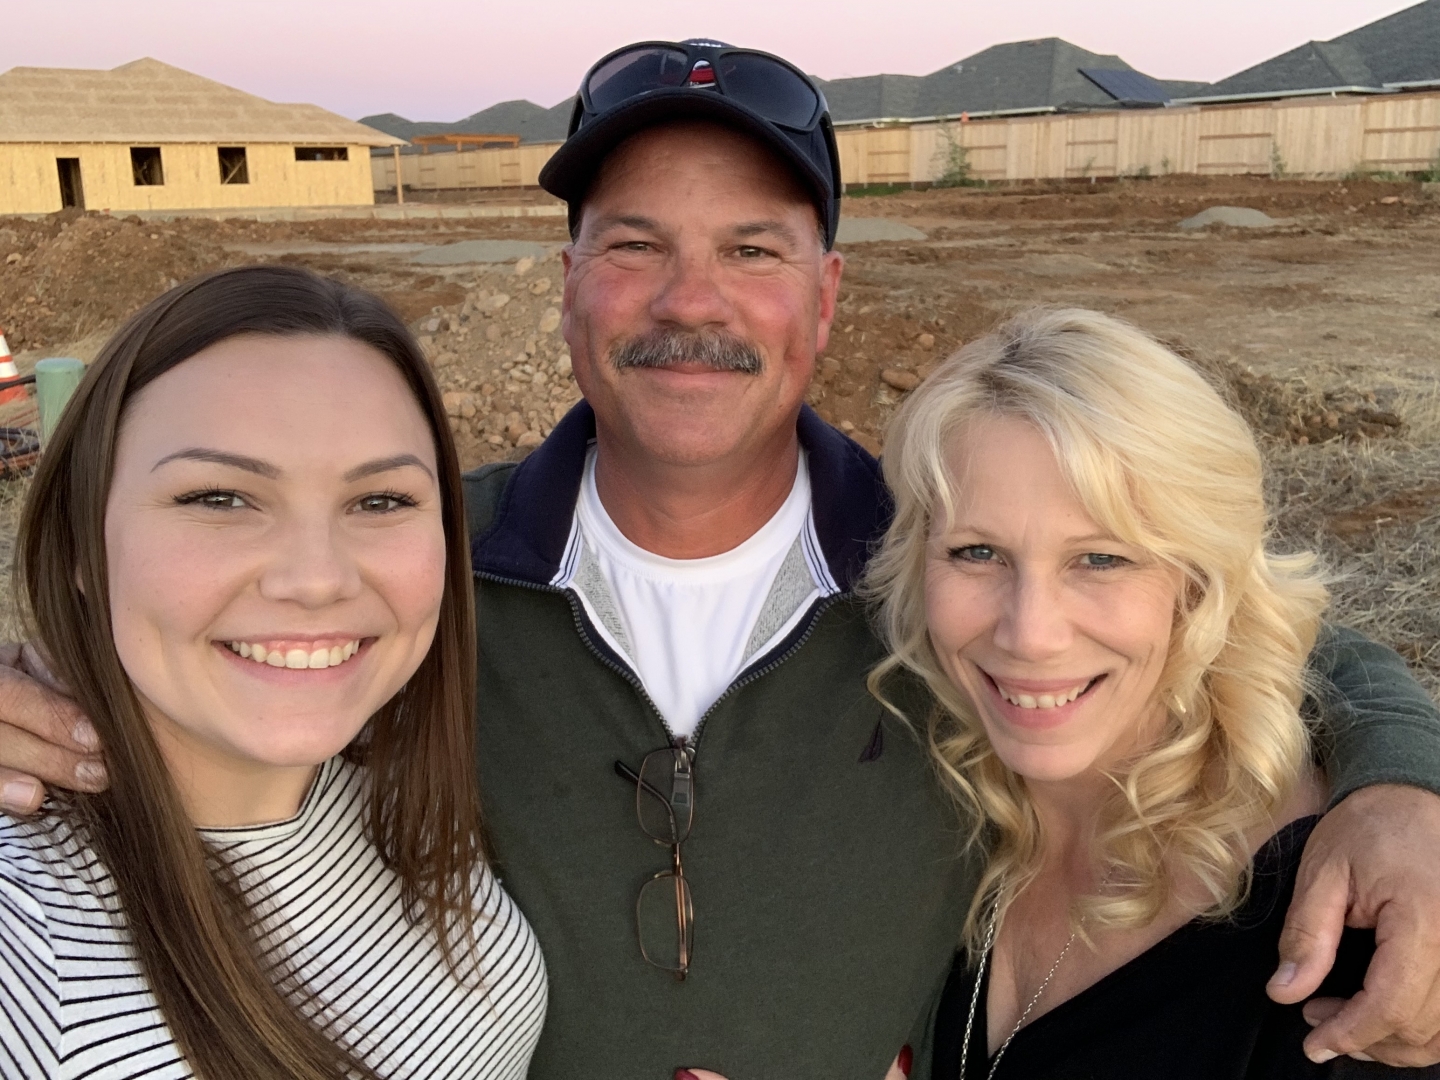 Kelsea Kennedy poses for a selfie with her dad and mom at the build site for their new home.